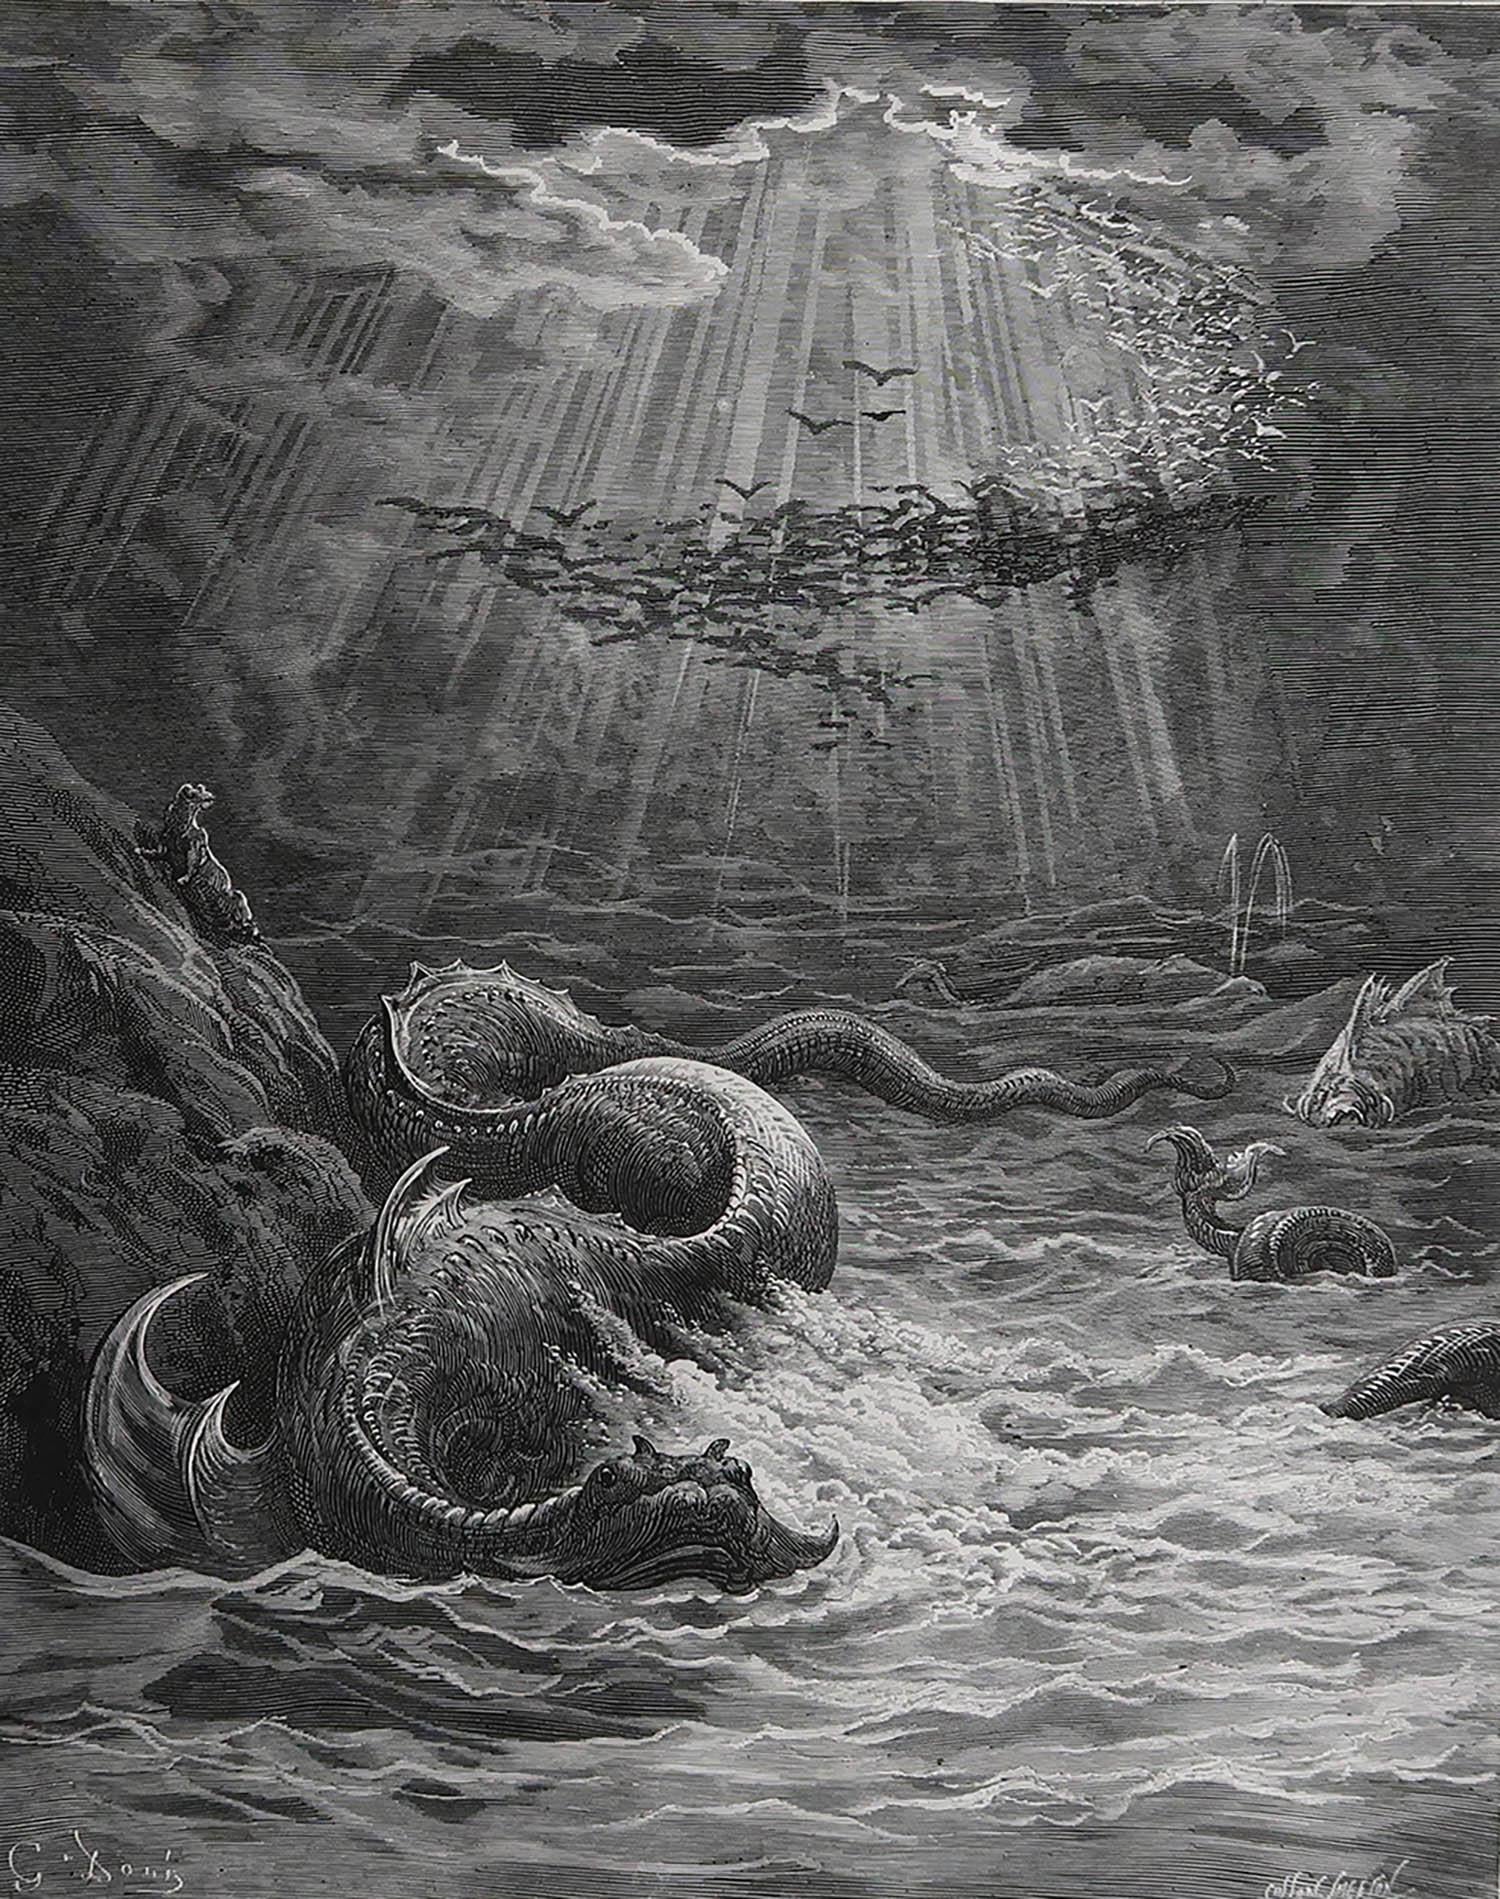 Sensational image by Gustave Dore

Originally an illustration for JohnMilton's 